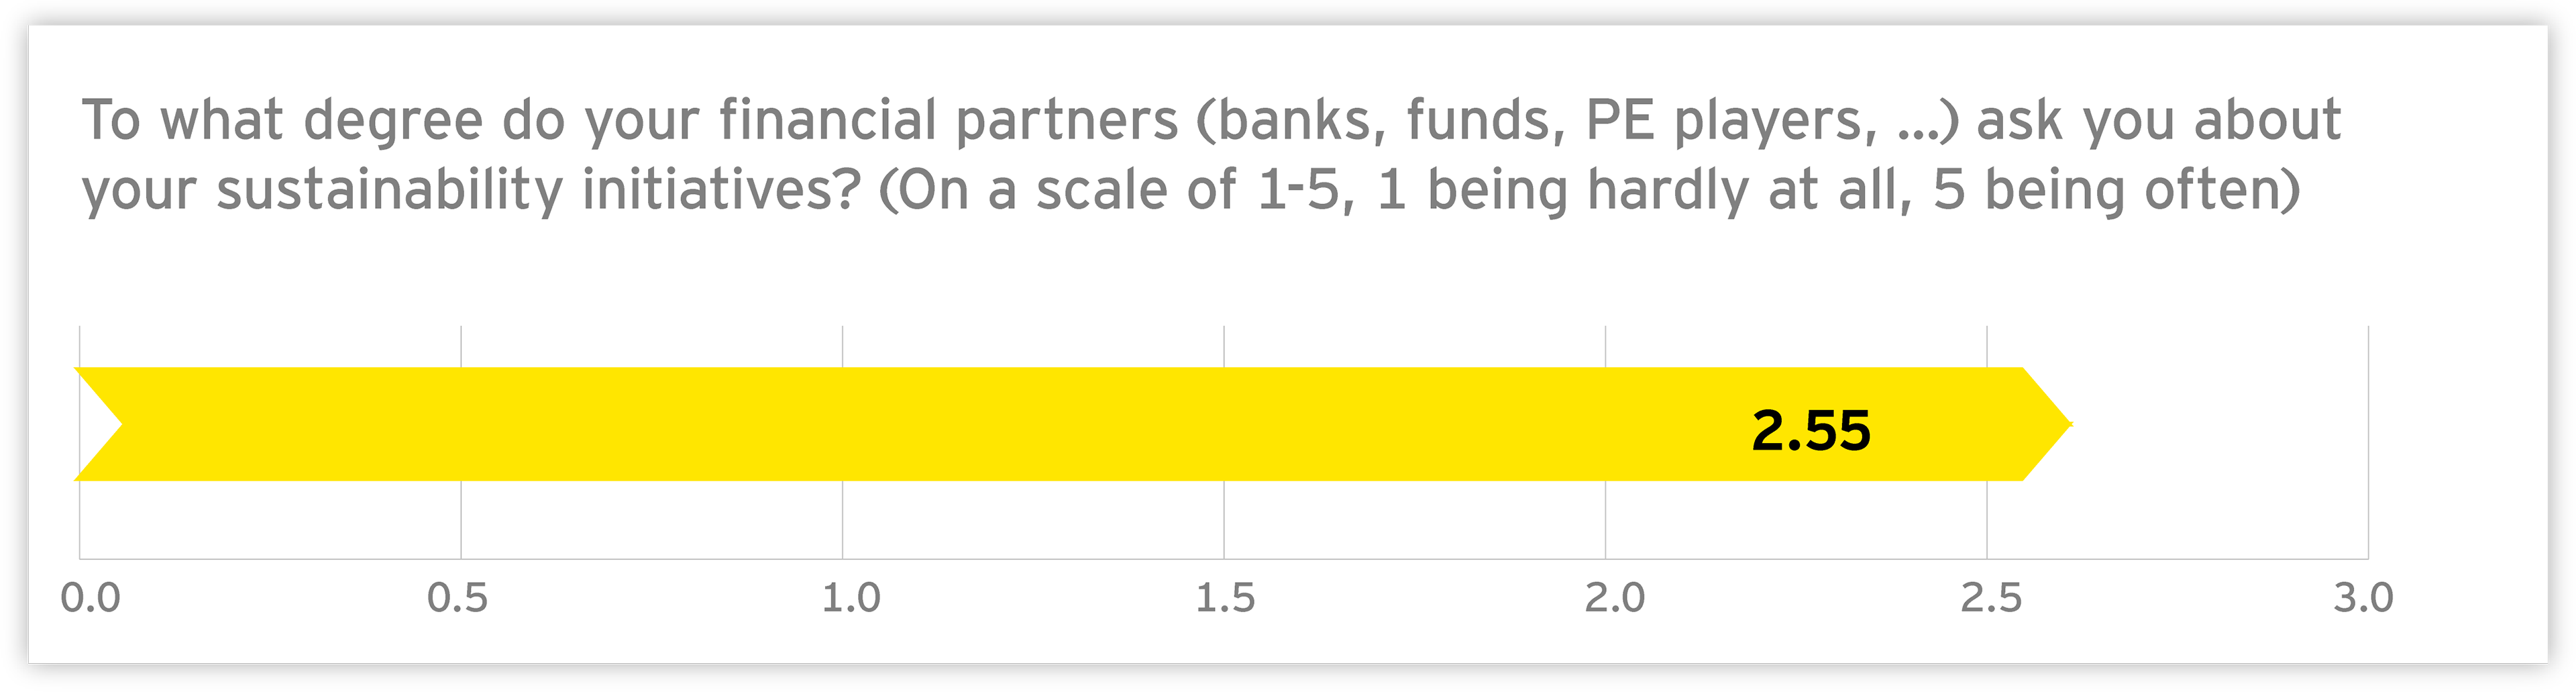 Graph: To what degree do your financial partners (banks, funds, PE players,…) ask you about your sustainability initiatives?